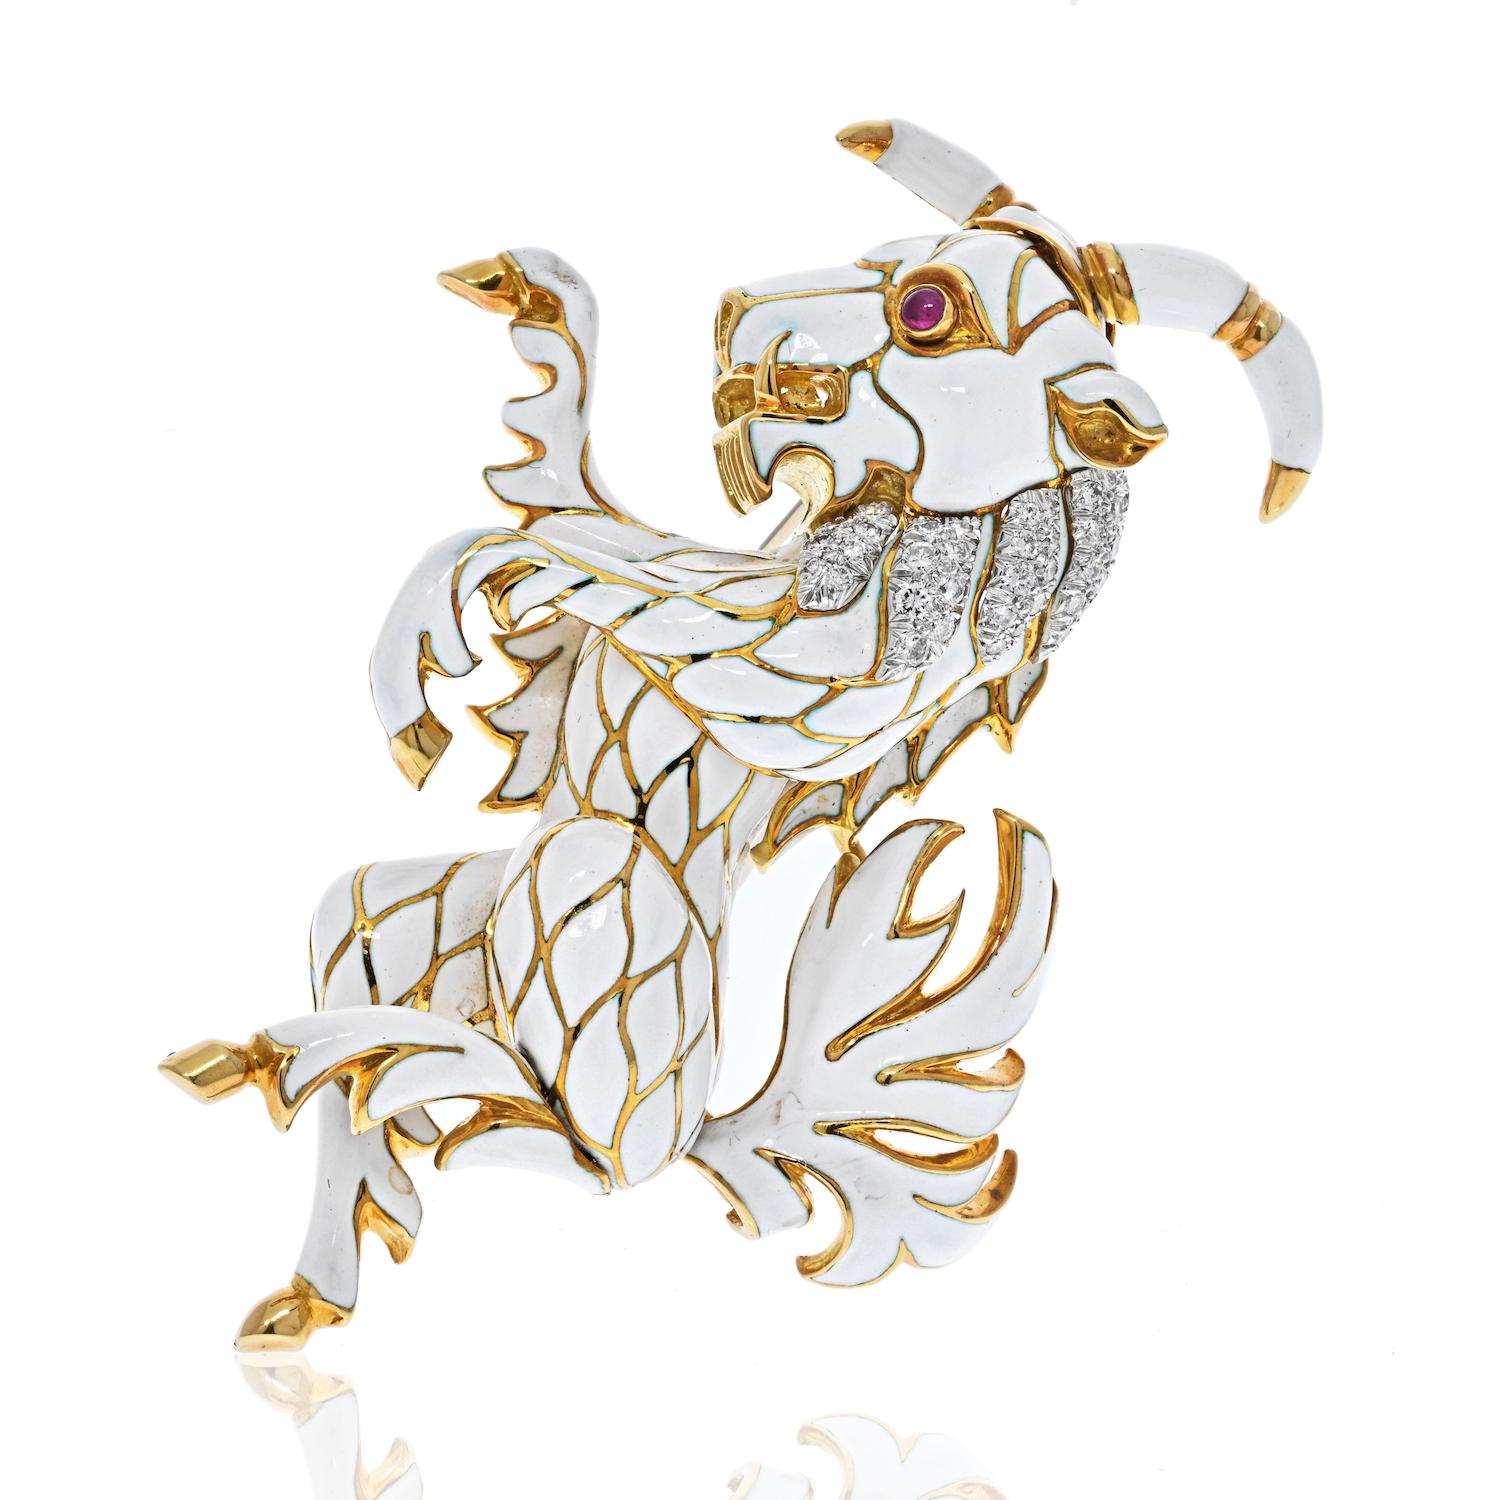 Indulge in the whimsical charm of this exquisite goat brooch, a true masterpiece designed by Webb. Crafted in 18-karat gold and platinum, this brooch is a testament to craftsmanship and attention to detail.

The goat is intricately designed and